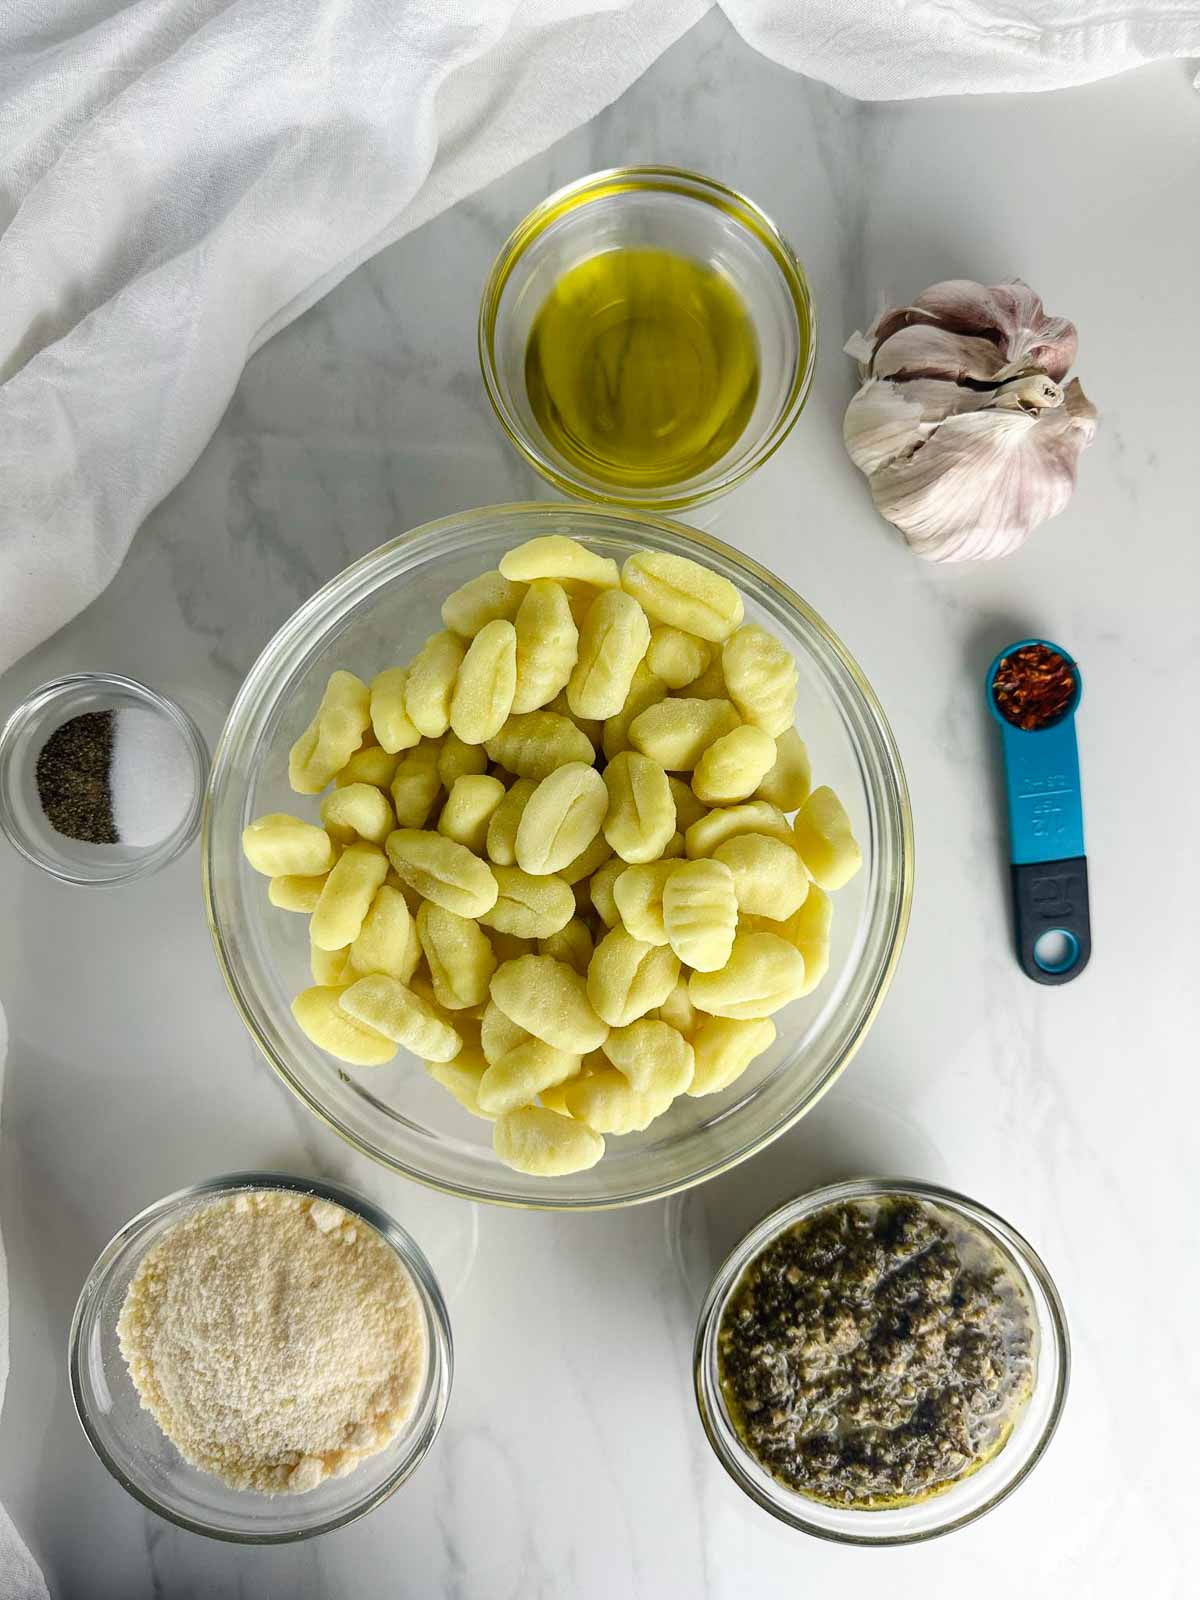 Ingredients for Gnocchi with Pesto Sauce: Gnocchi, Olive Oil, Salt, Pepper, Red Pepper, and Pesto